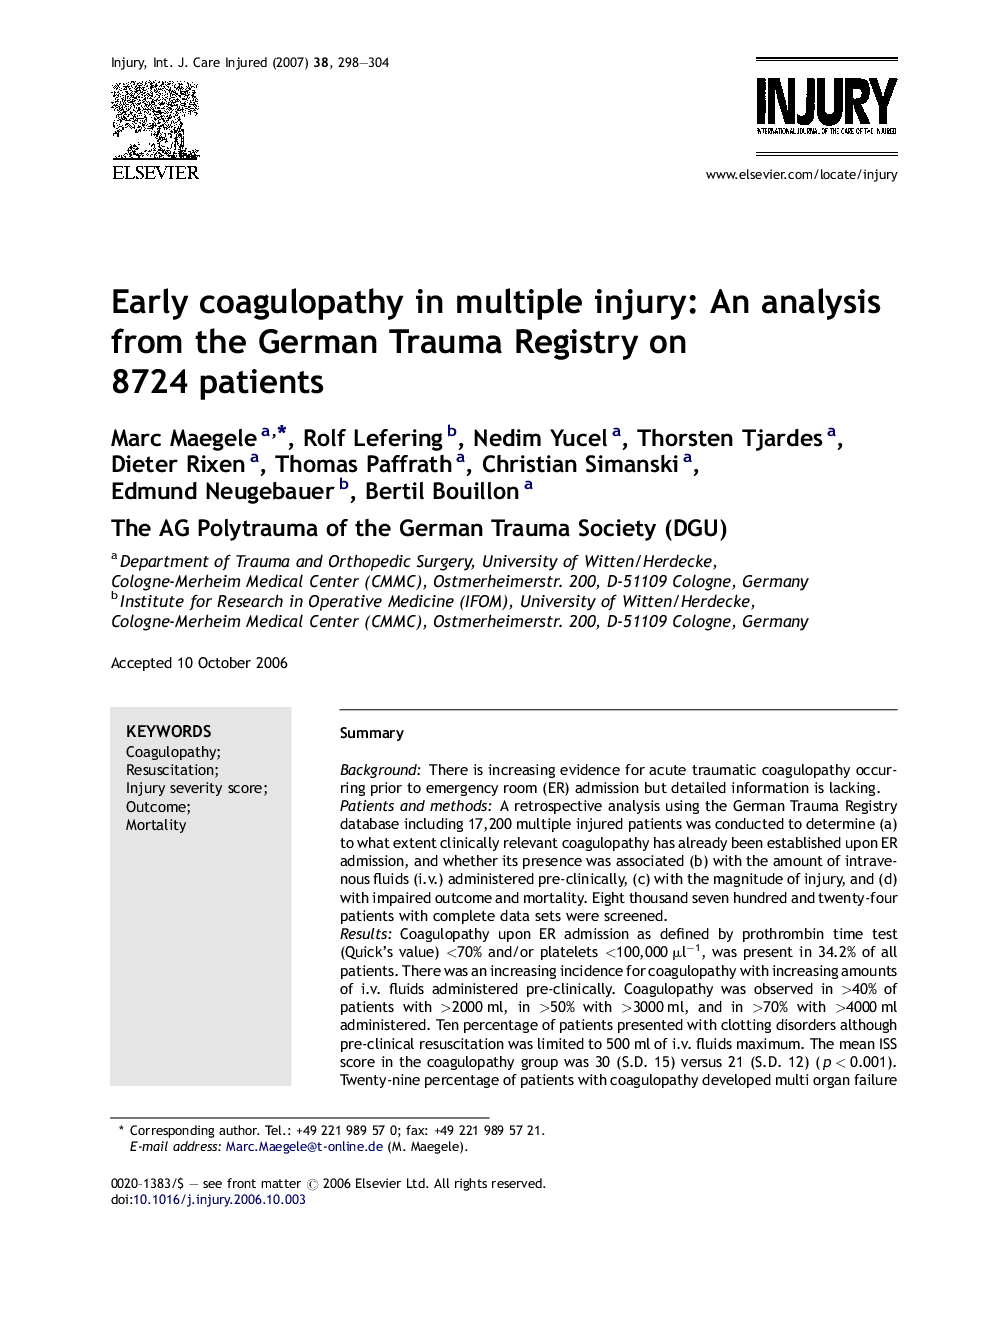 Early coagulopathy in multiple injury: An analysis from the German Trauma Registry on 8724 patients